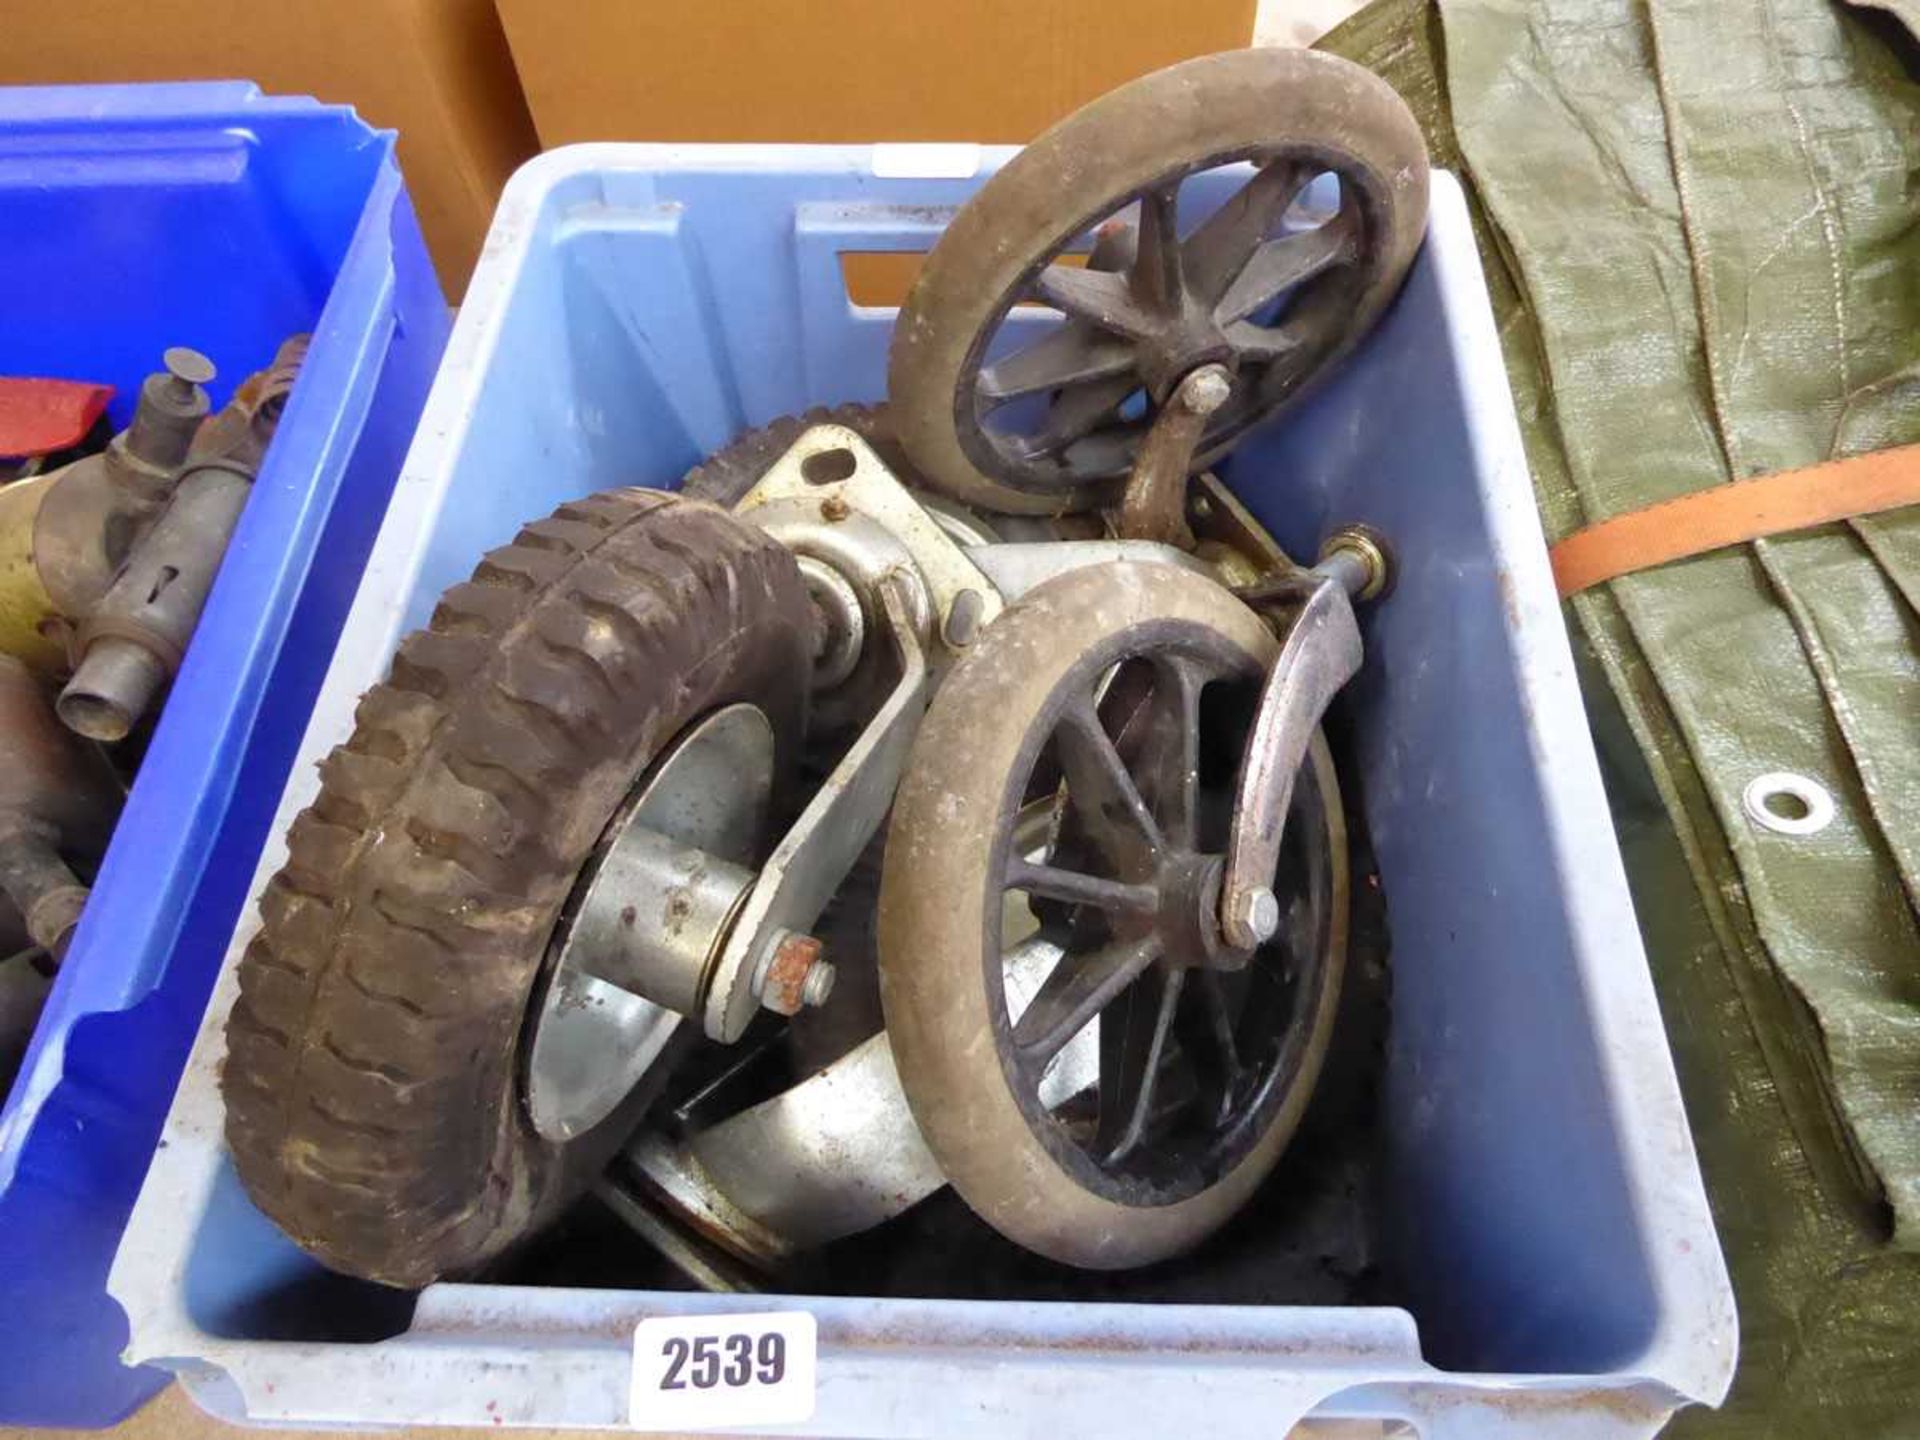 Crate of various sized castors and wheels